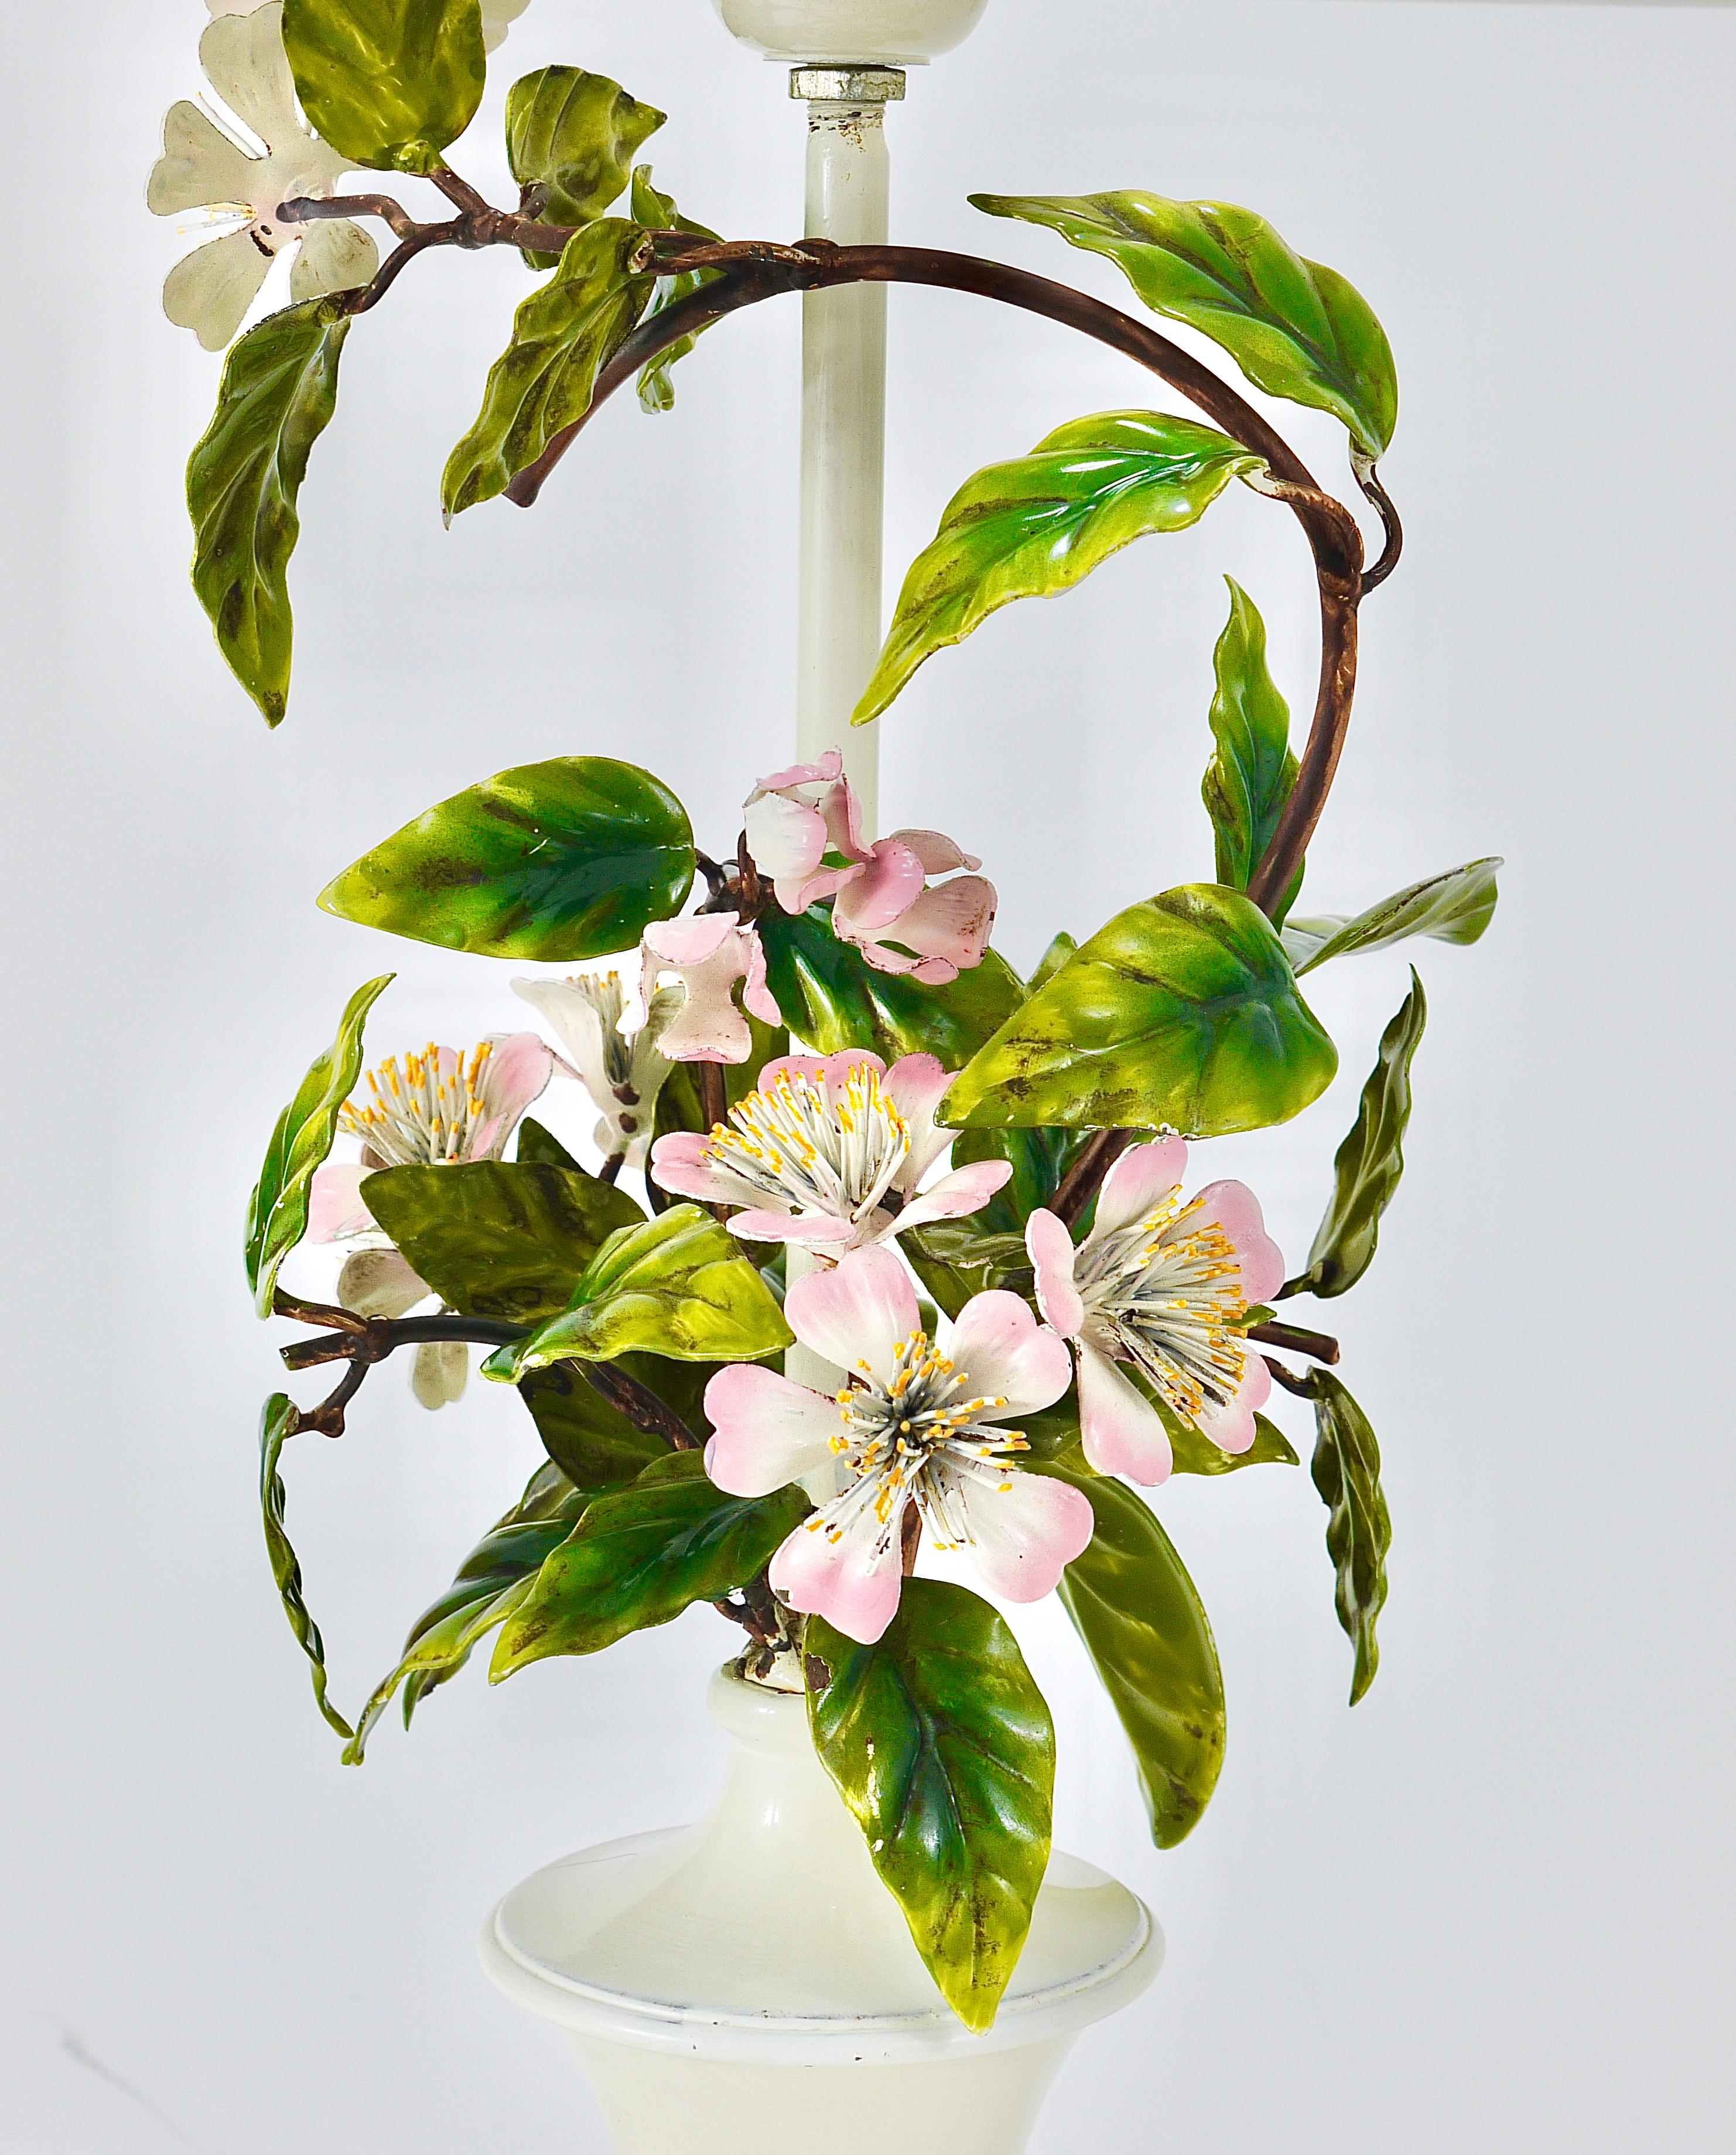 Salvadori Hand Painted Wild Apple Blossom Toleware Table Lamp, Italy, 1950s For Sale 1